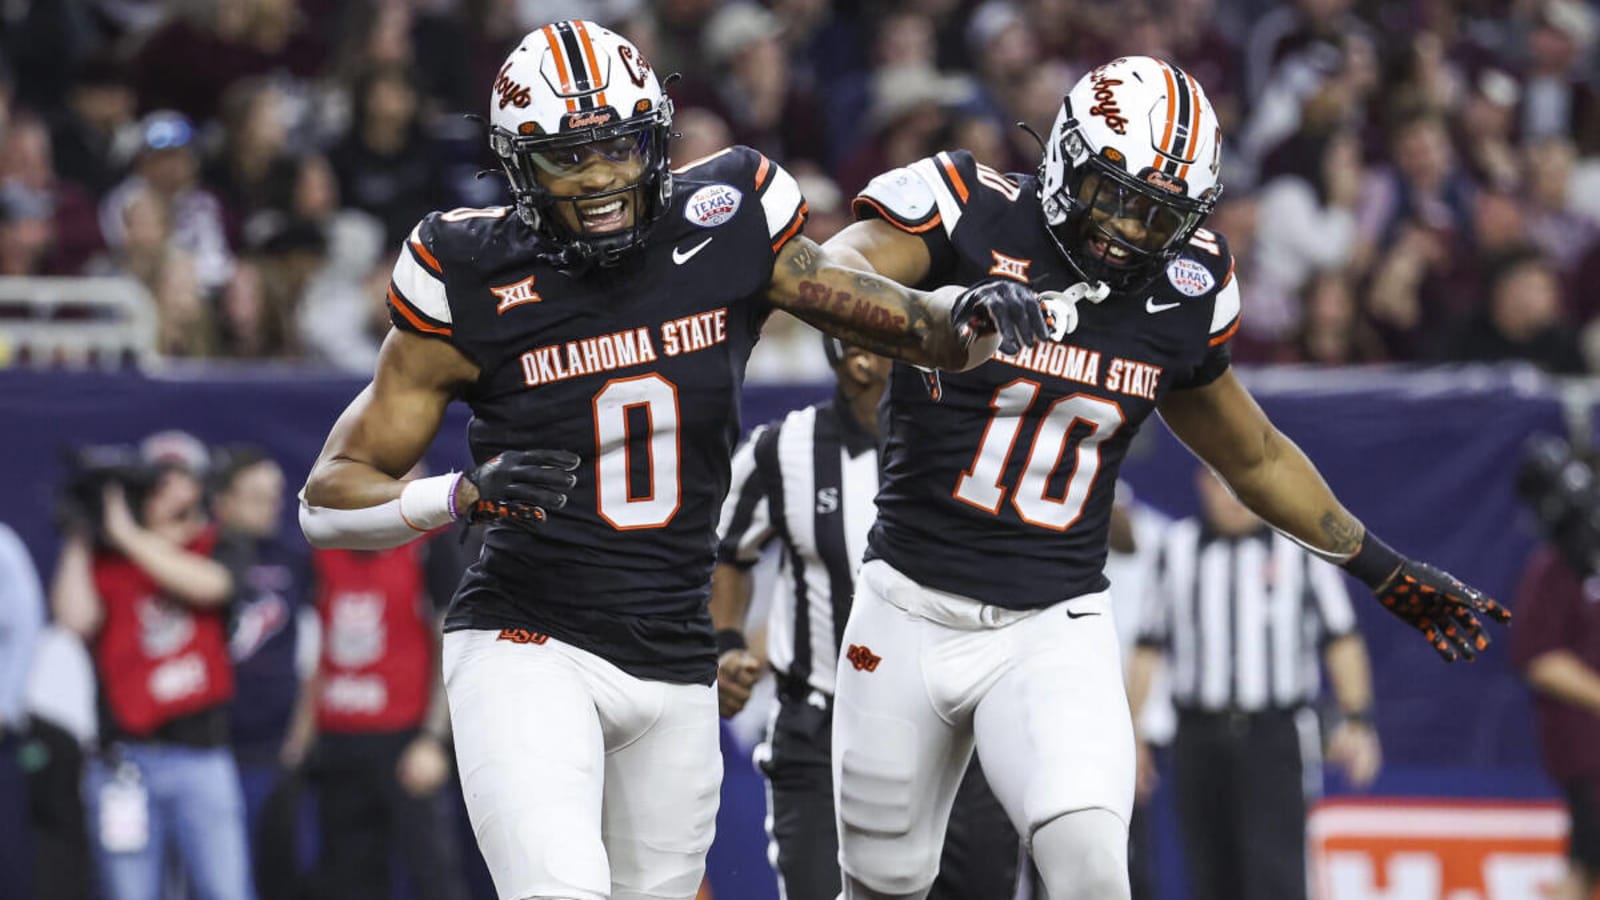 Oklahoma State Caps Off 10-Win Season With Texas Bowl Victory Over Texas A&M